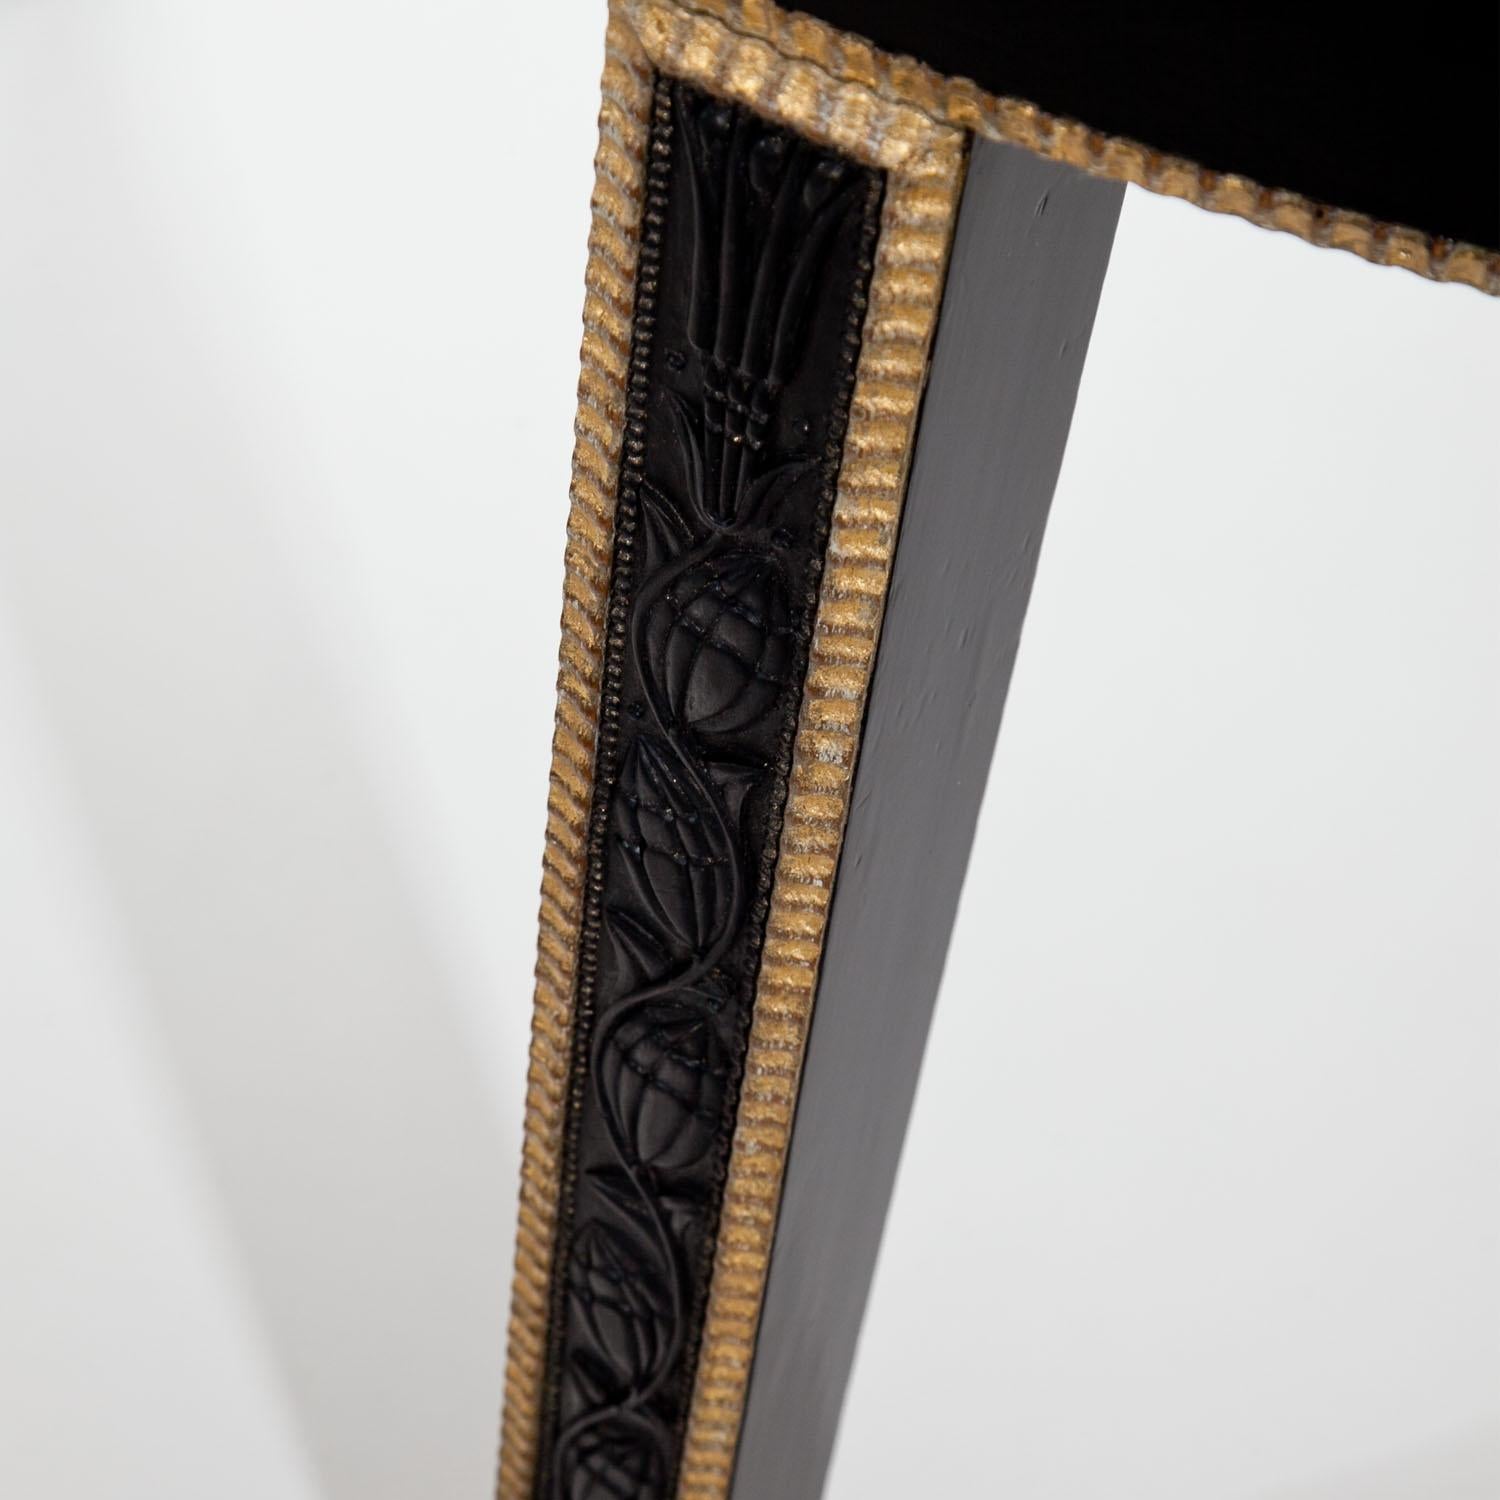 Ebonized demilune console table of the Vienna Secession, standing on three legs. The straight apron and the legs are decorated with gilt wavy profiles, the latter also with carved flowers and vines at the front. The glass top is recent.